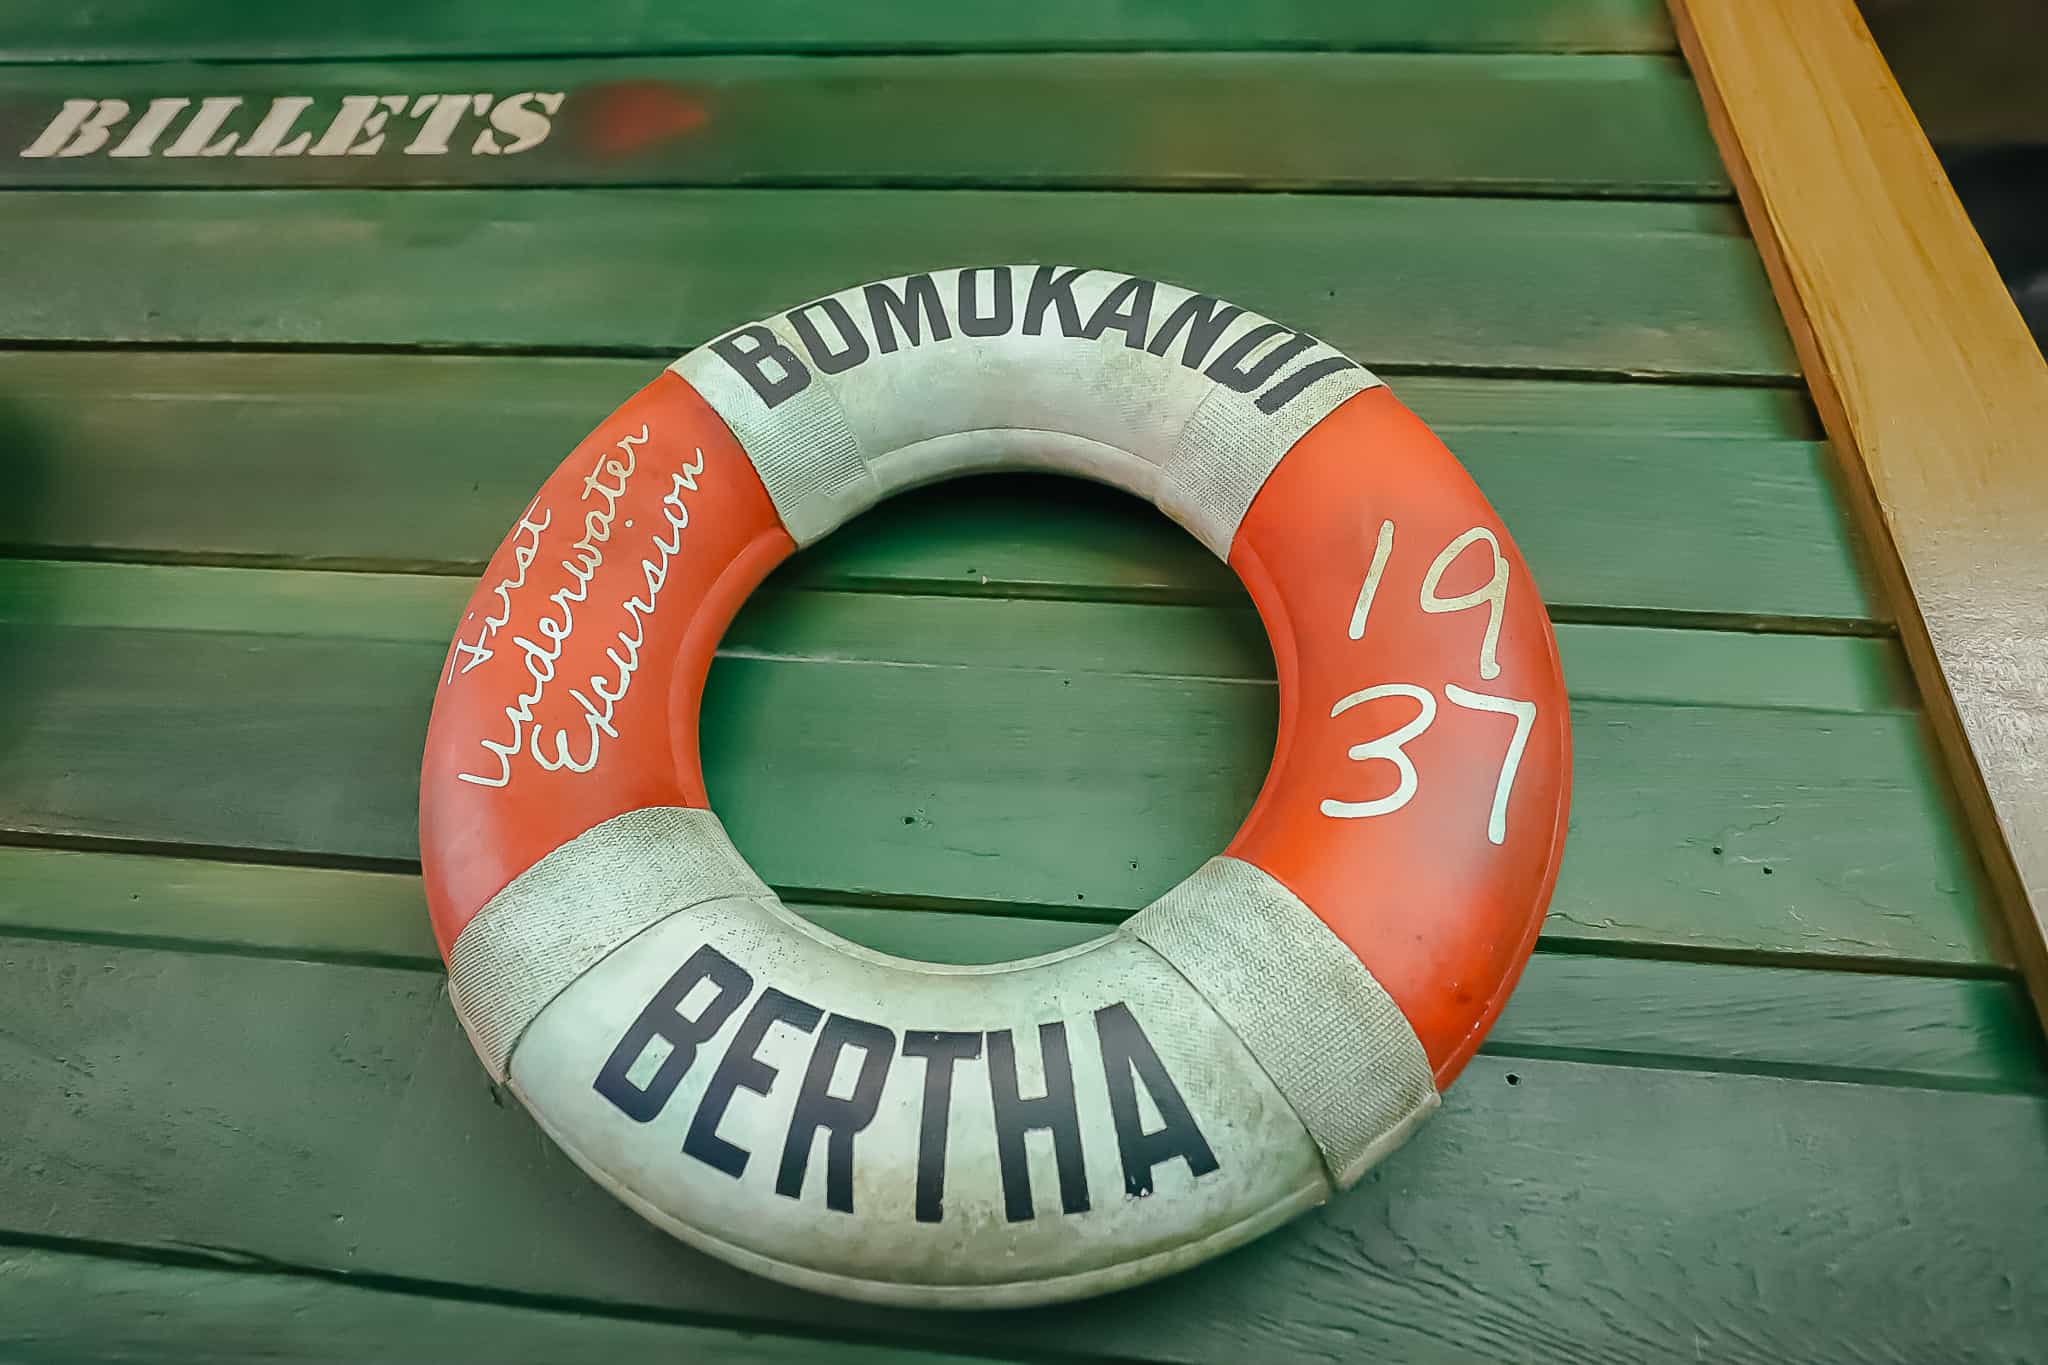 A queue element, life preserver with one of the boats names printed on it. 